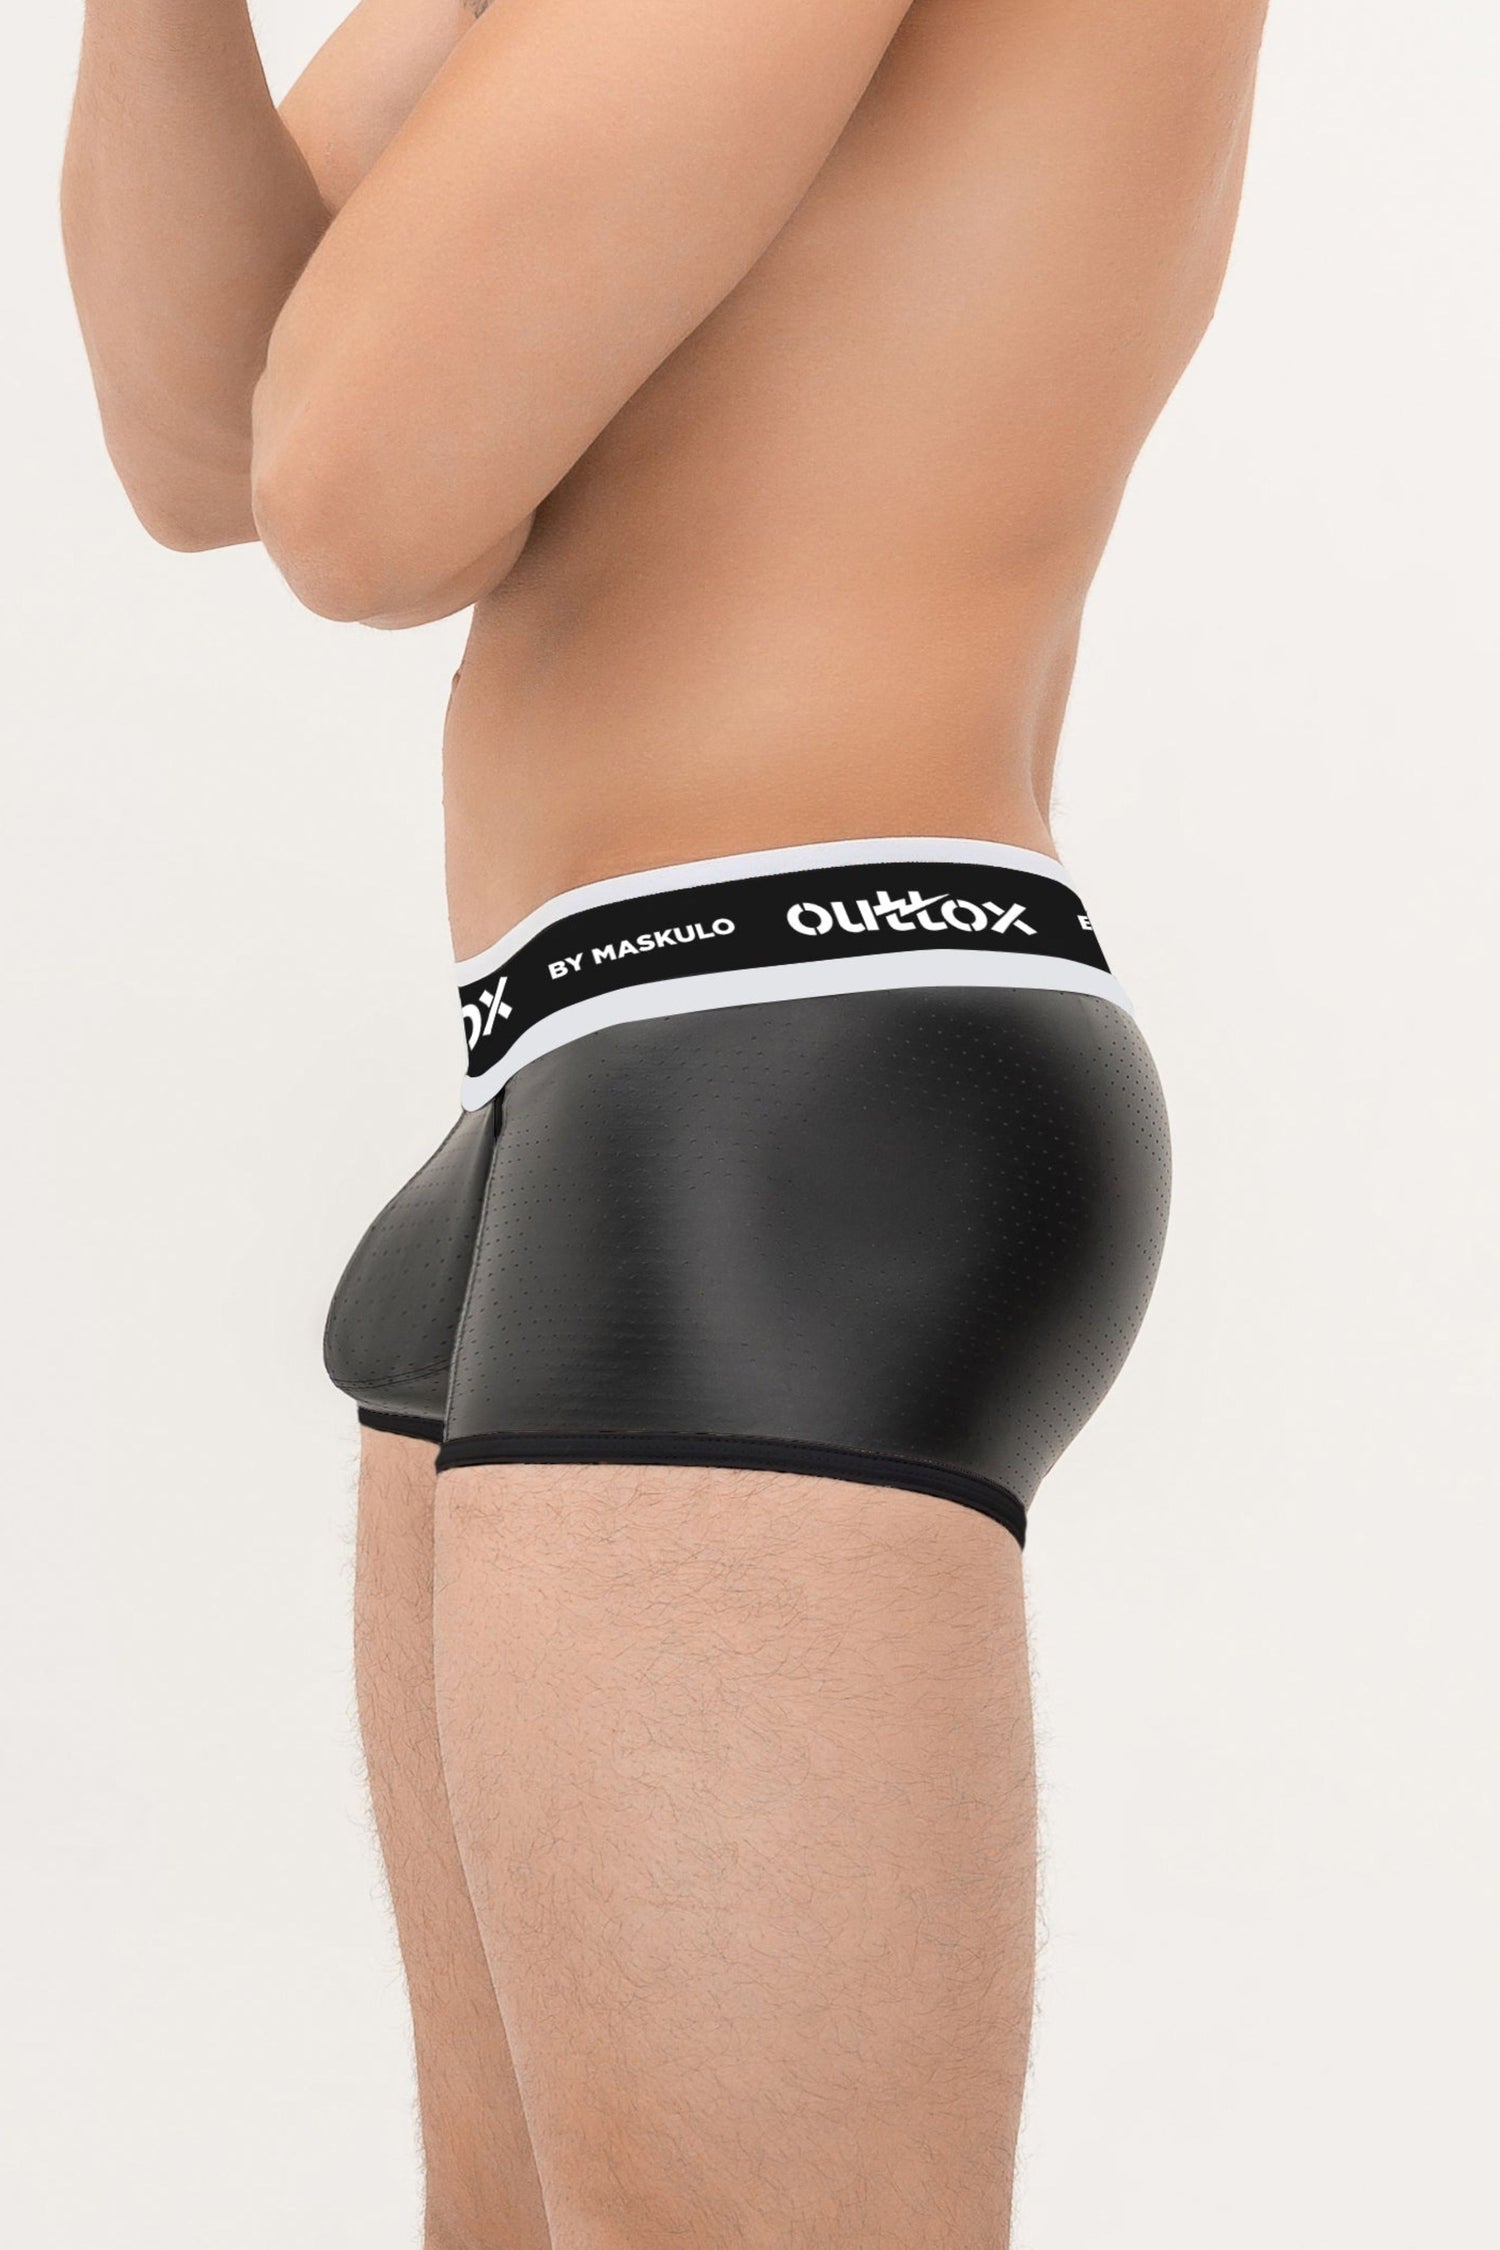 Outtox. Wrapped Rear Trunk Shorts with Snap Codpiece. Black